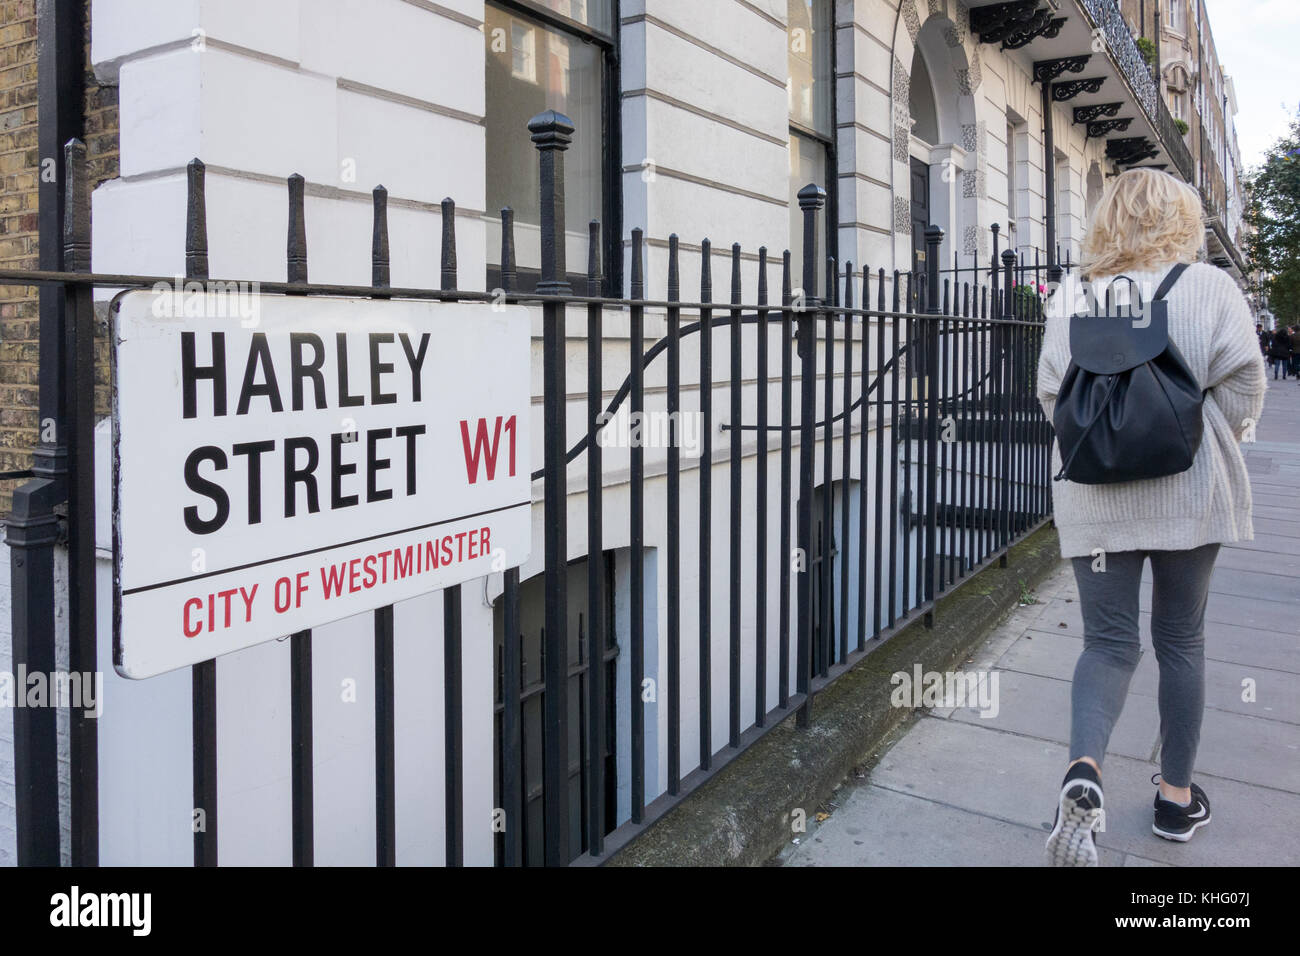 A woman walking past the famous Harley Street, City of Westminster, W1, street sign, London, England, U.K. Stock Photo